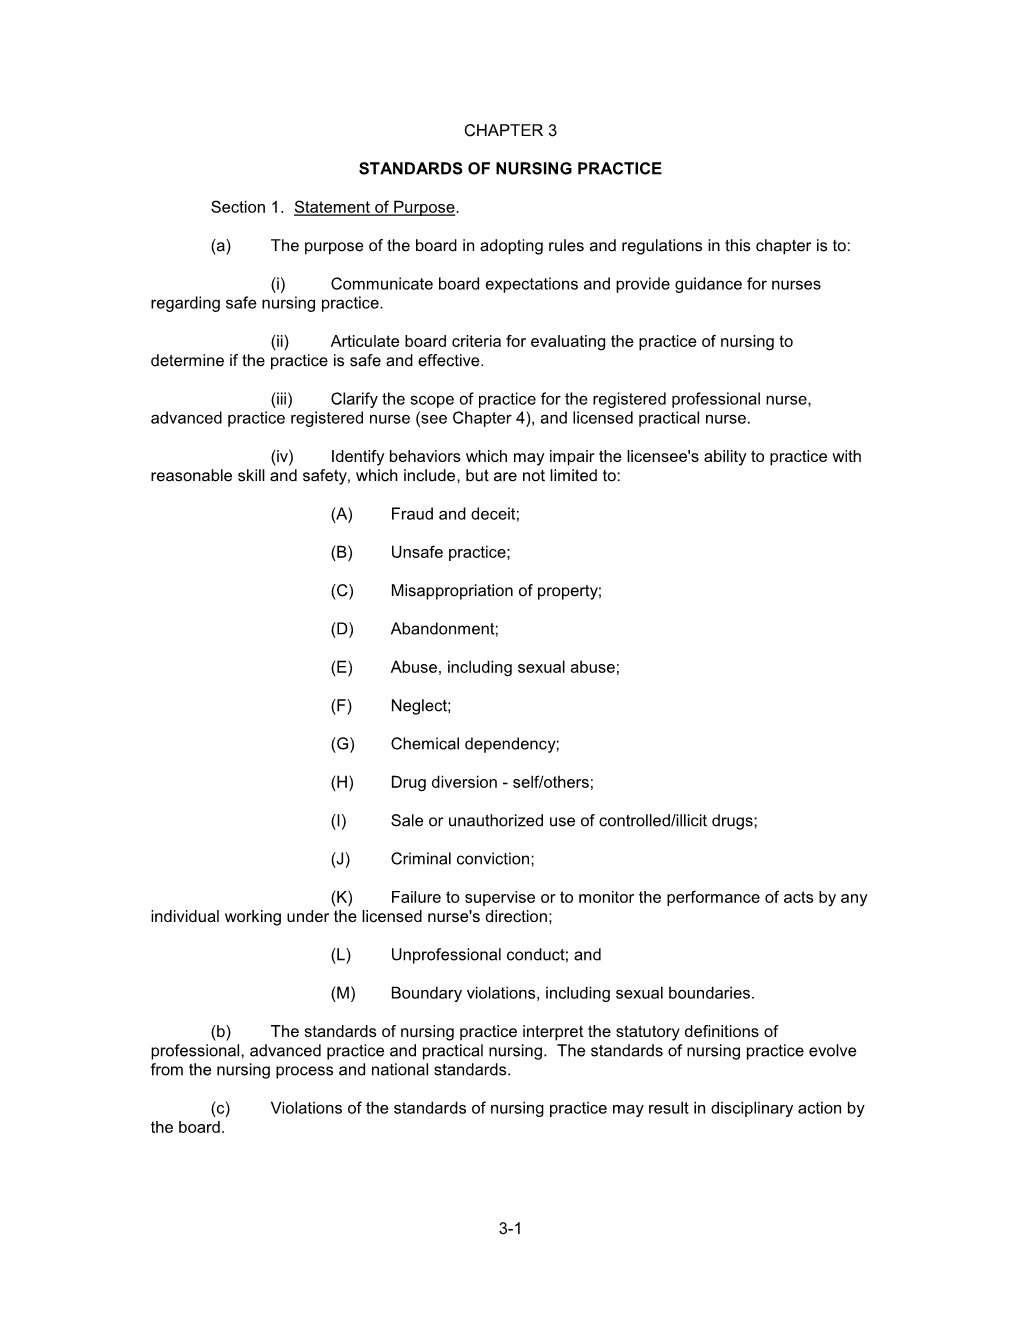 3-1 CHAPTER 3 STANDARDS of NURSING PRACTICE Section 1